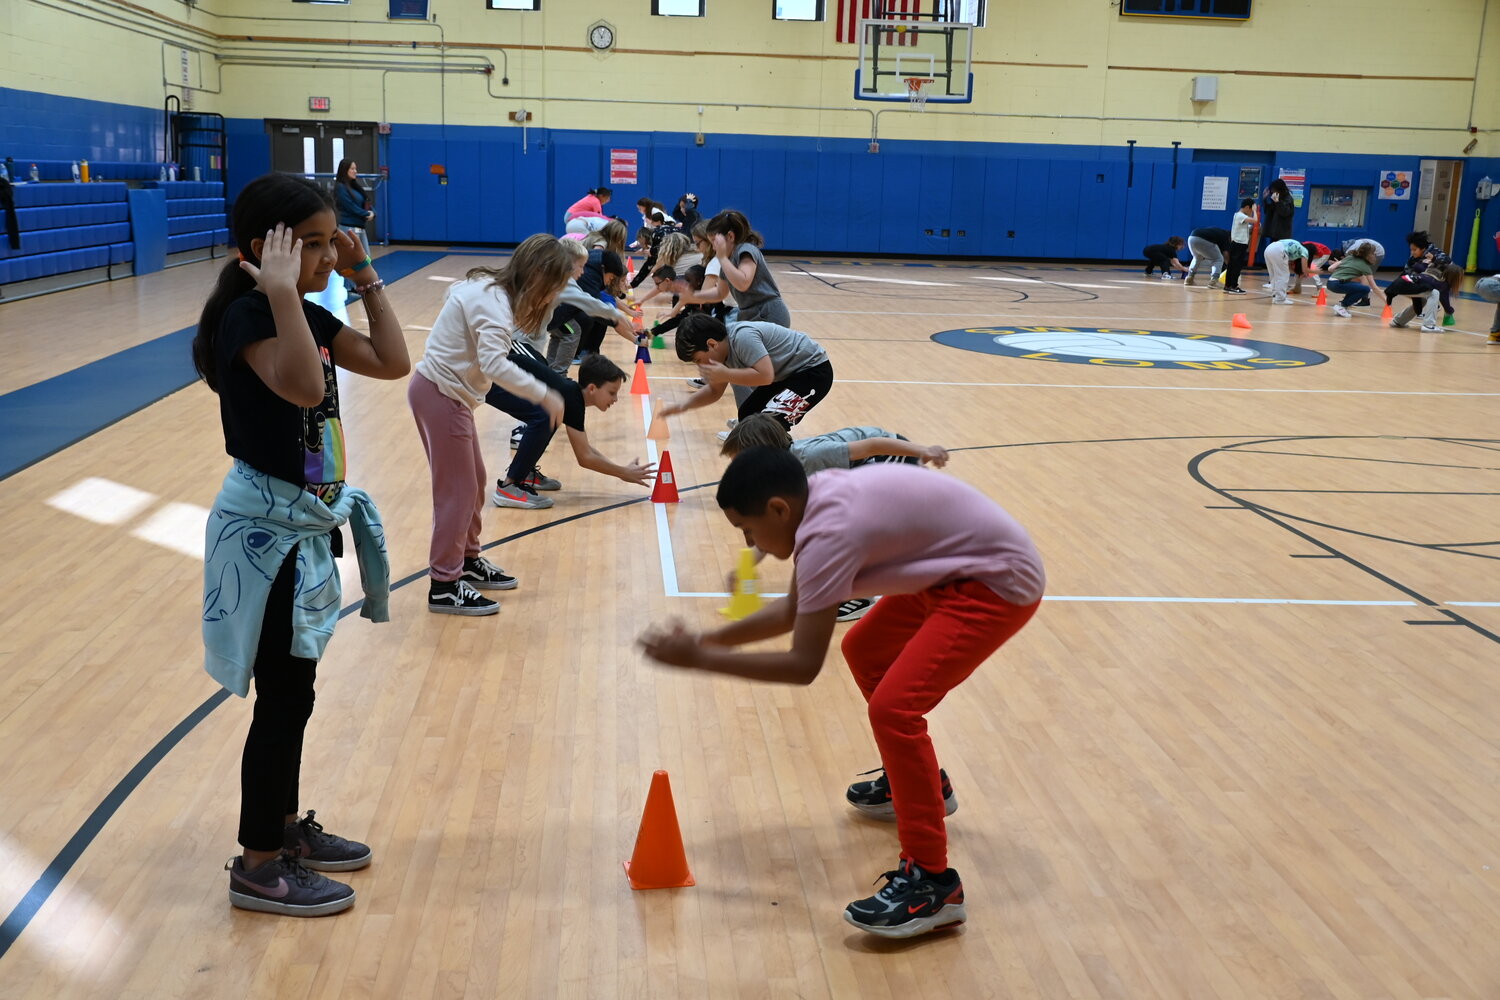 Students had a fun morning working together on team-building games.